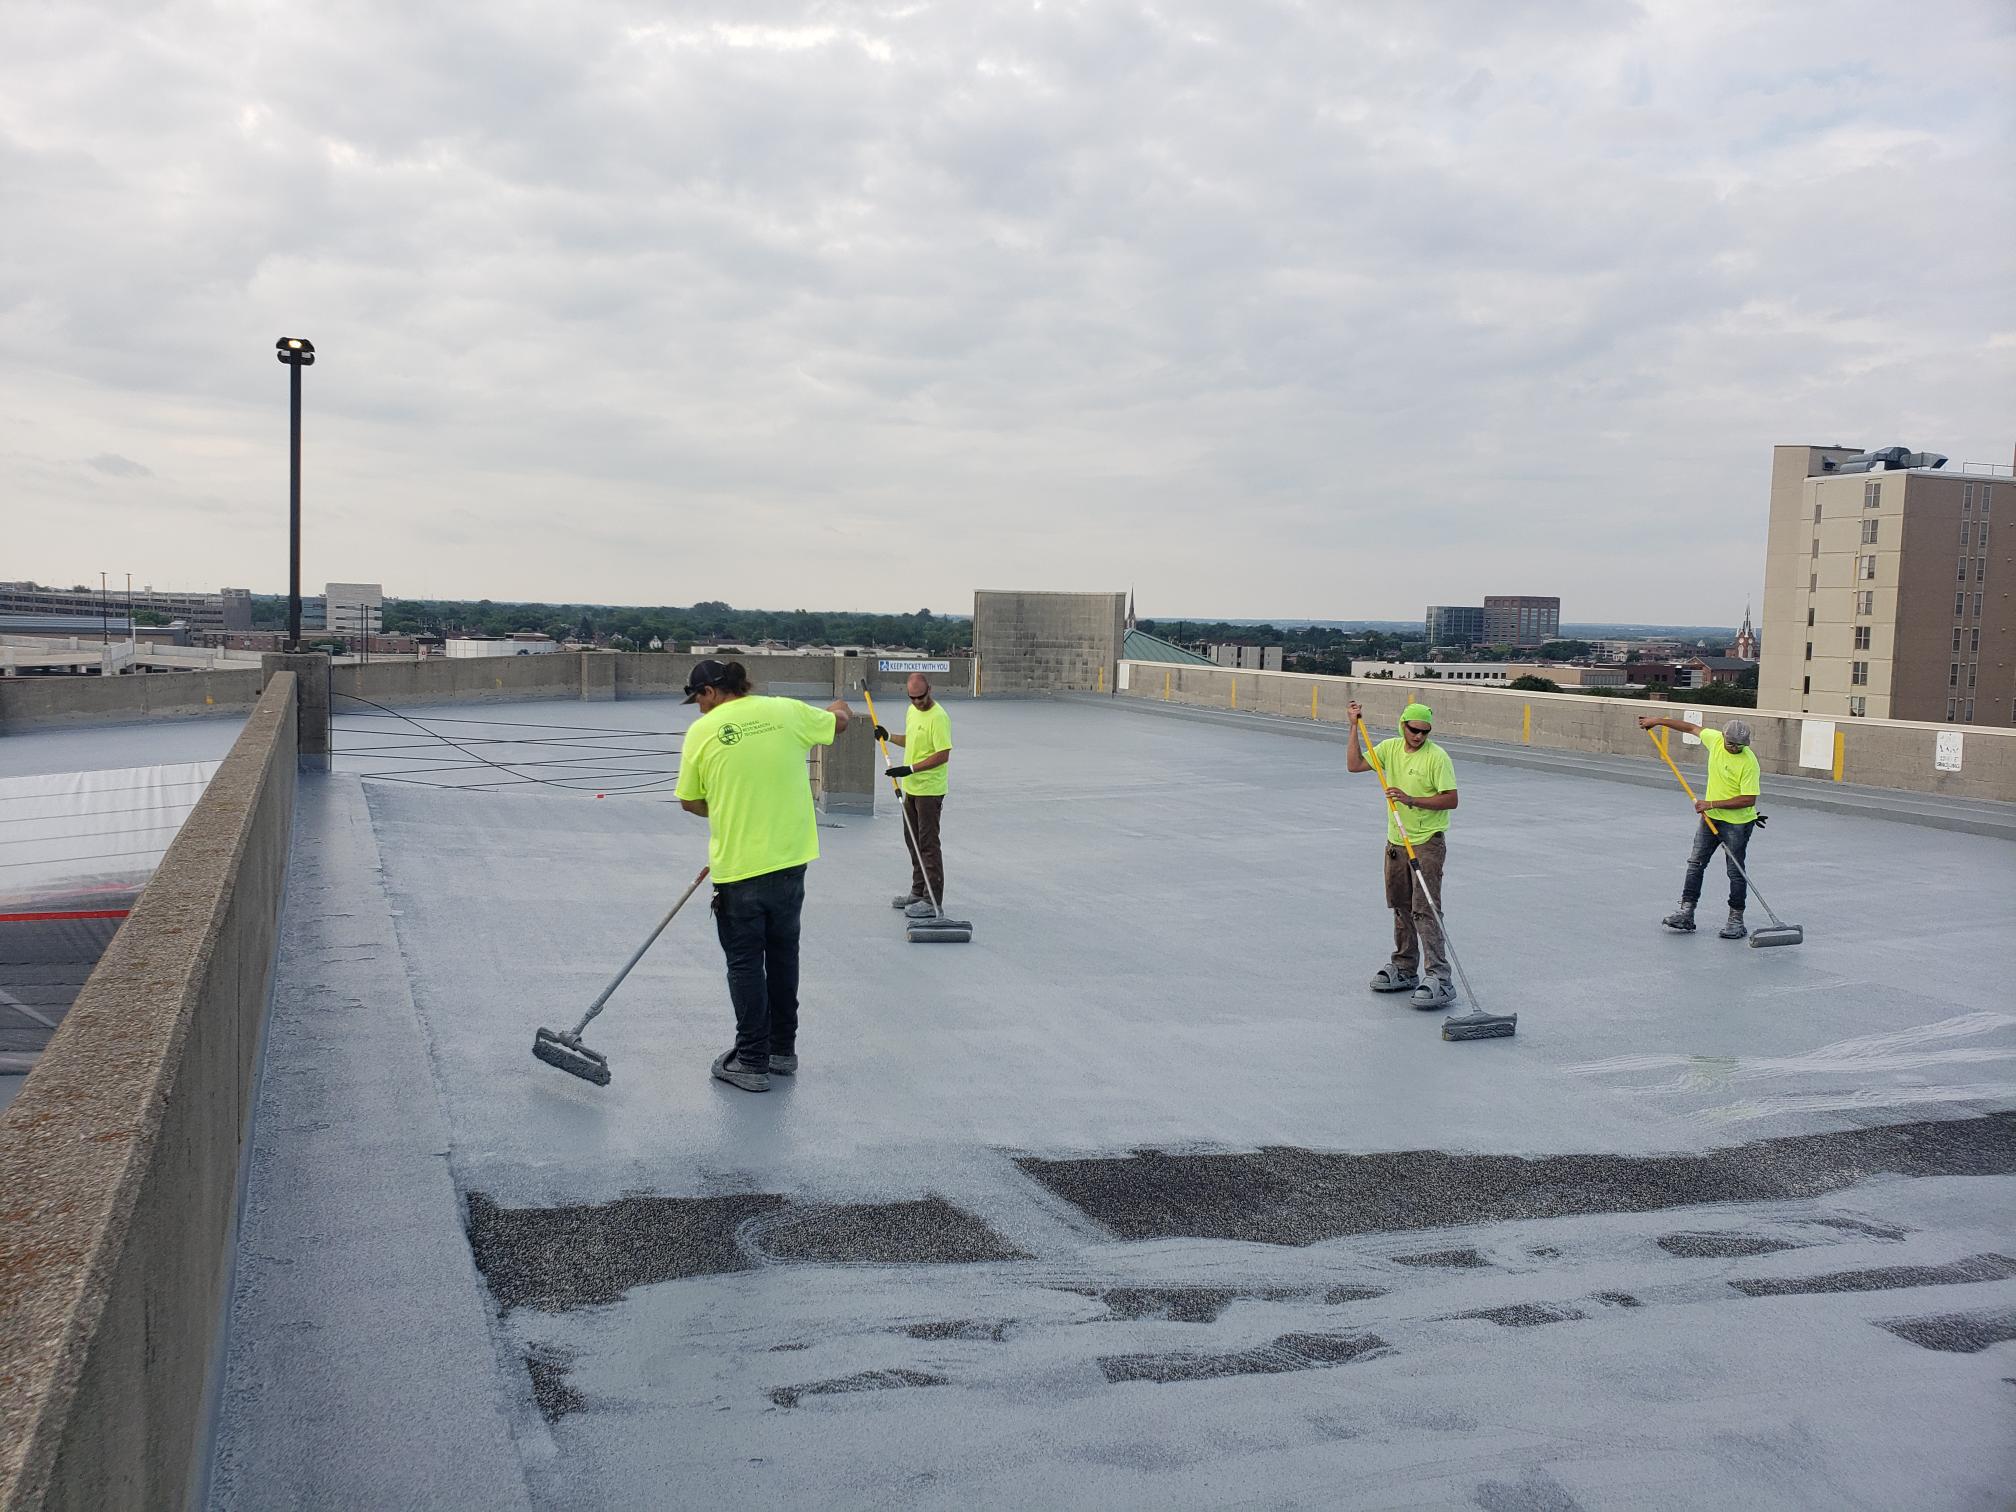 The top concrete, masonry, & building restoration experts serving central Ohio!  We specialize in structural concrete repair and restoration, concrete deck repair, sealing, and coating, as well as exterior caulking, expansion joint repair, exterior pressure washing, and more! Contact us today!